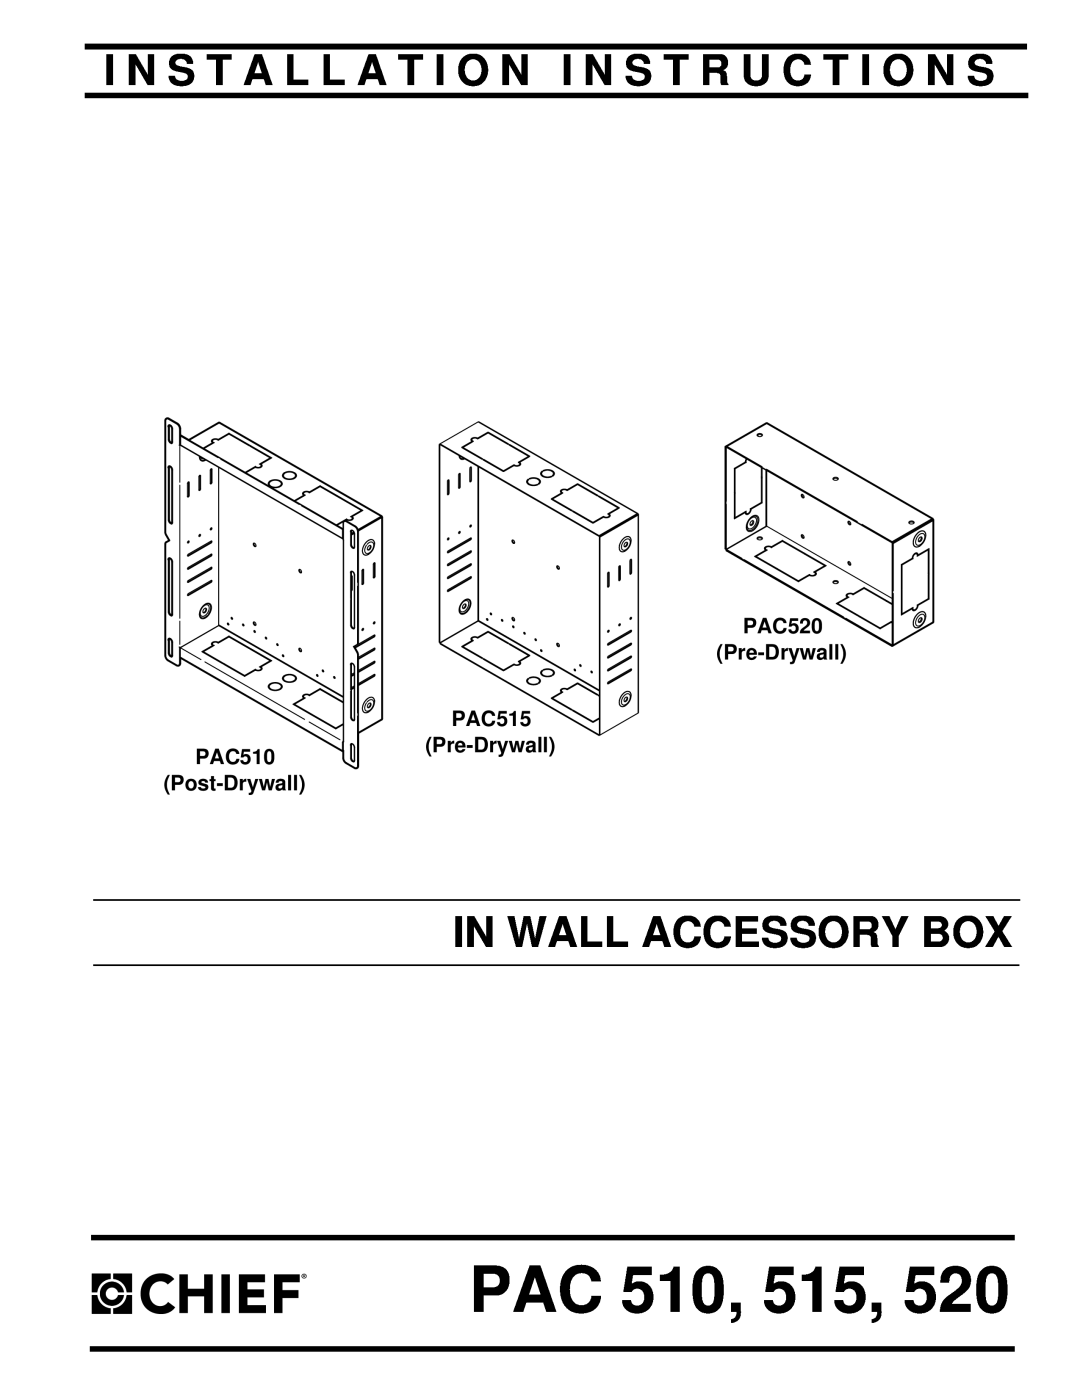 Chief Manufacturing installation instructions PAC510 Post-Drywall, PAC515 Pre-Drywall, PAC520 Pre-Drywall, Pac 